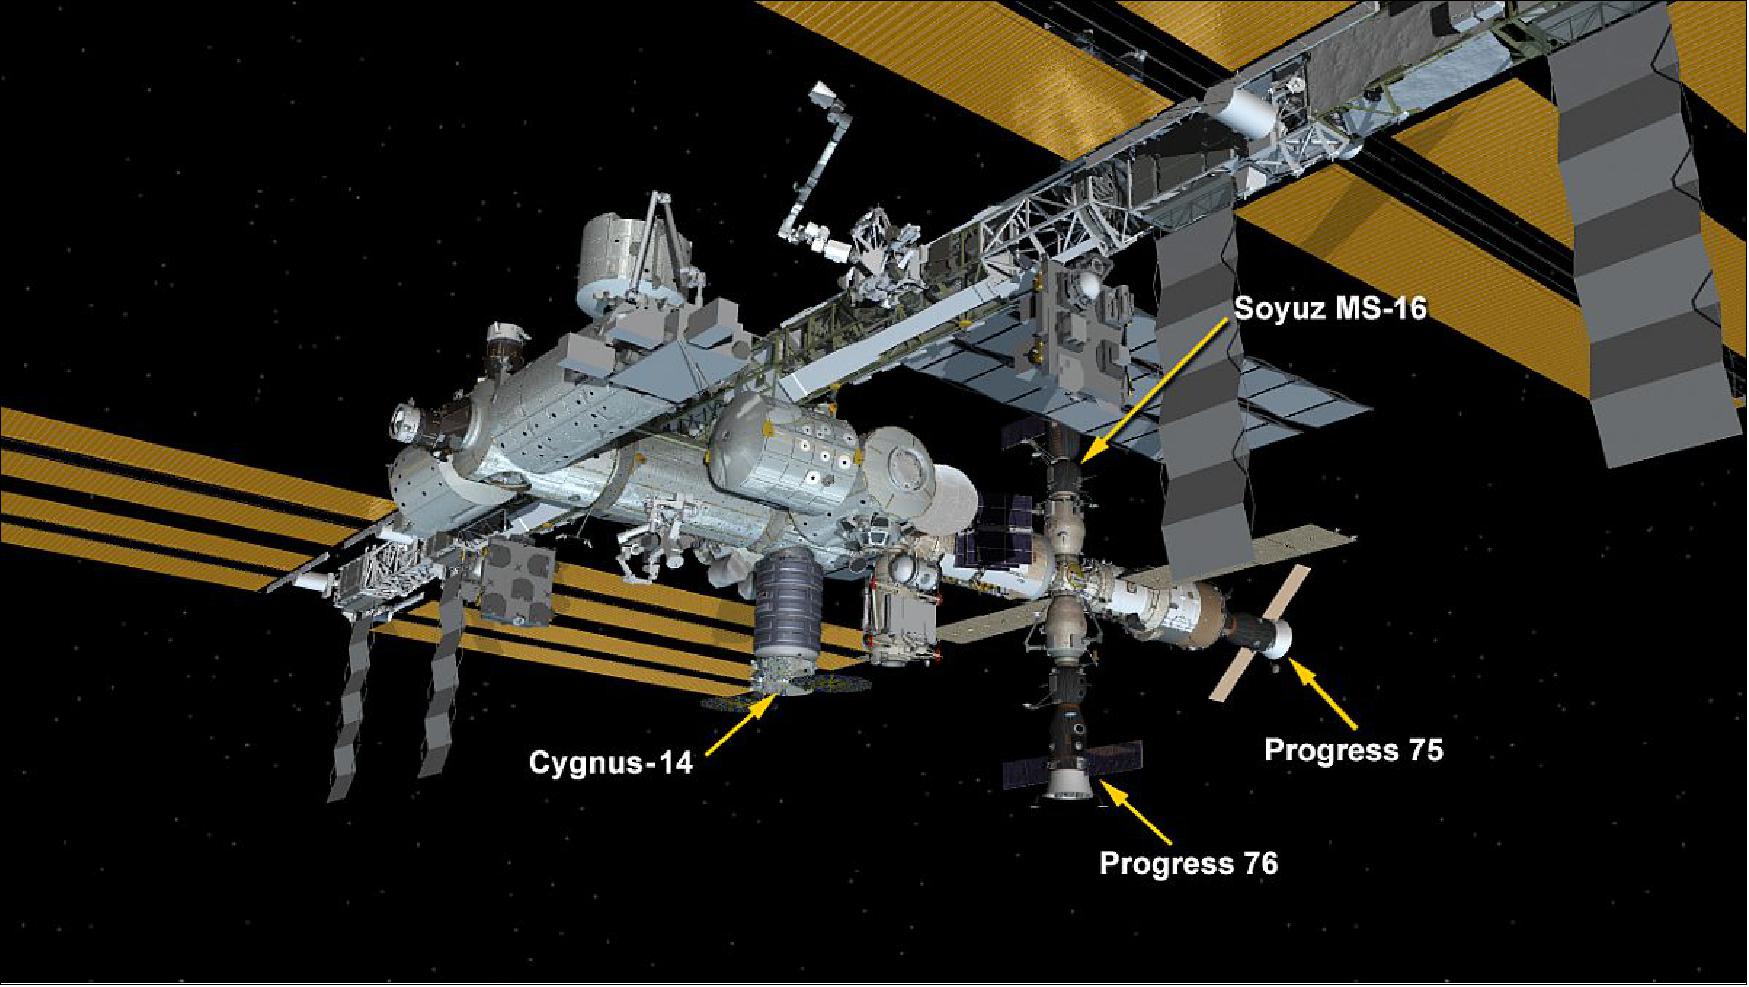 Figure 5: Oct. 5, 2020: International Space Station Configuration. Four spaceships are docked to the space station including Russia’s Progress 75 and 76 resupply ships and Soyuz MS-16 crew ship and Northrop Grumman’s Cygnus-14 resupply ship (image credit: NASA)